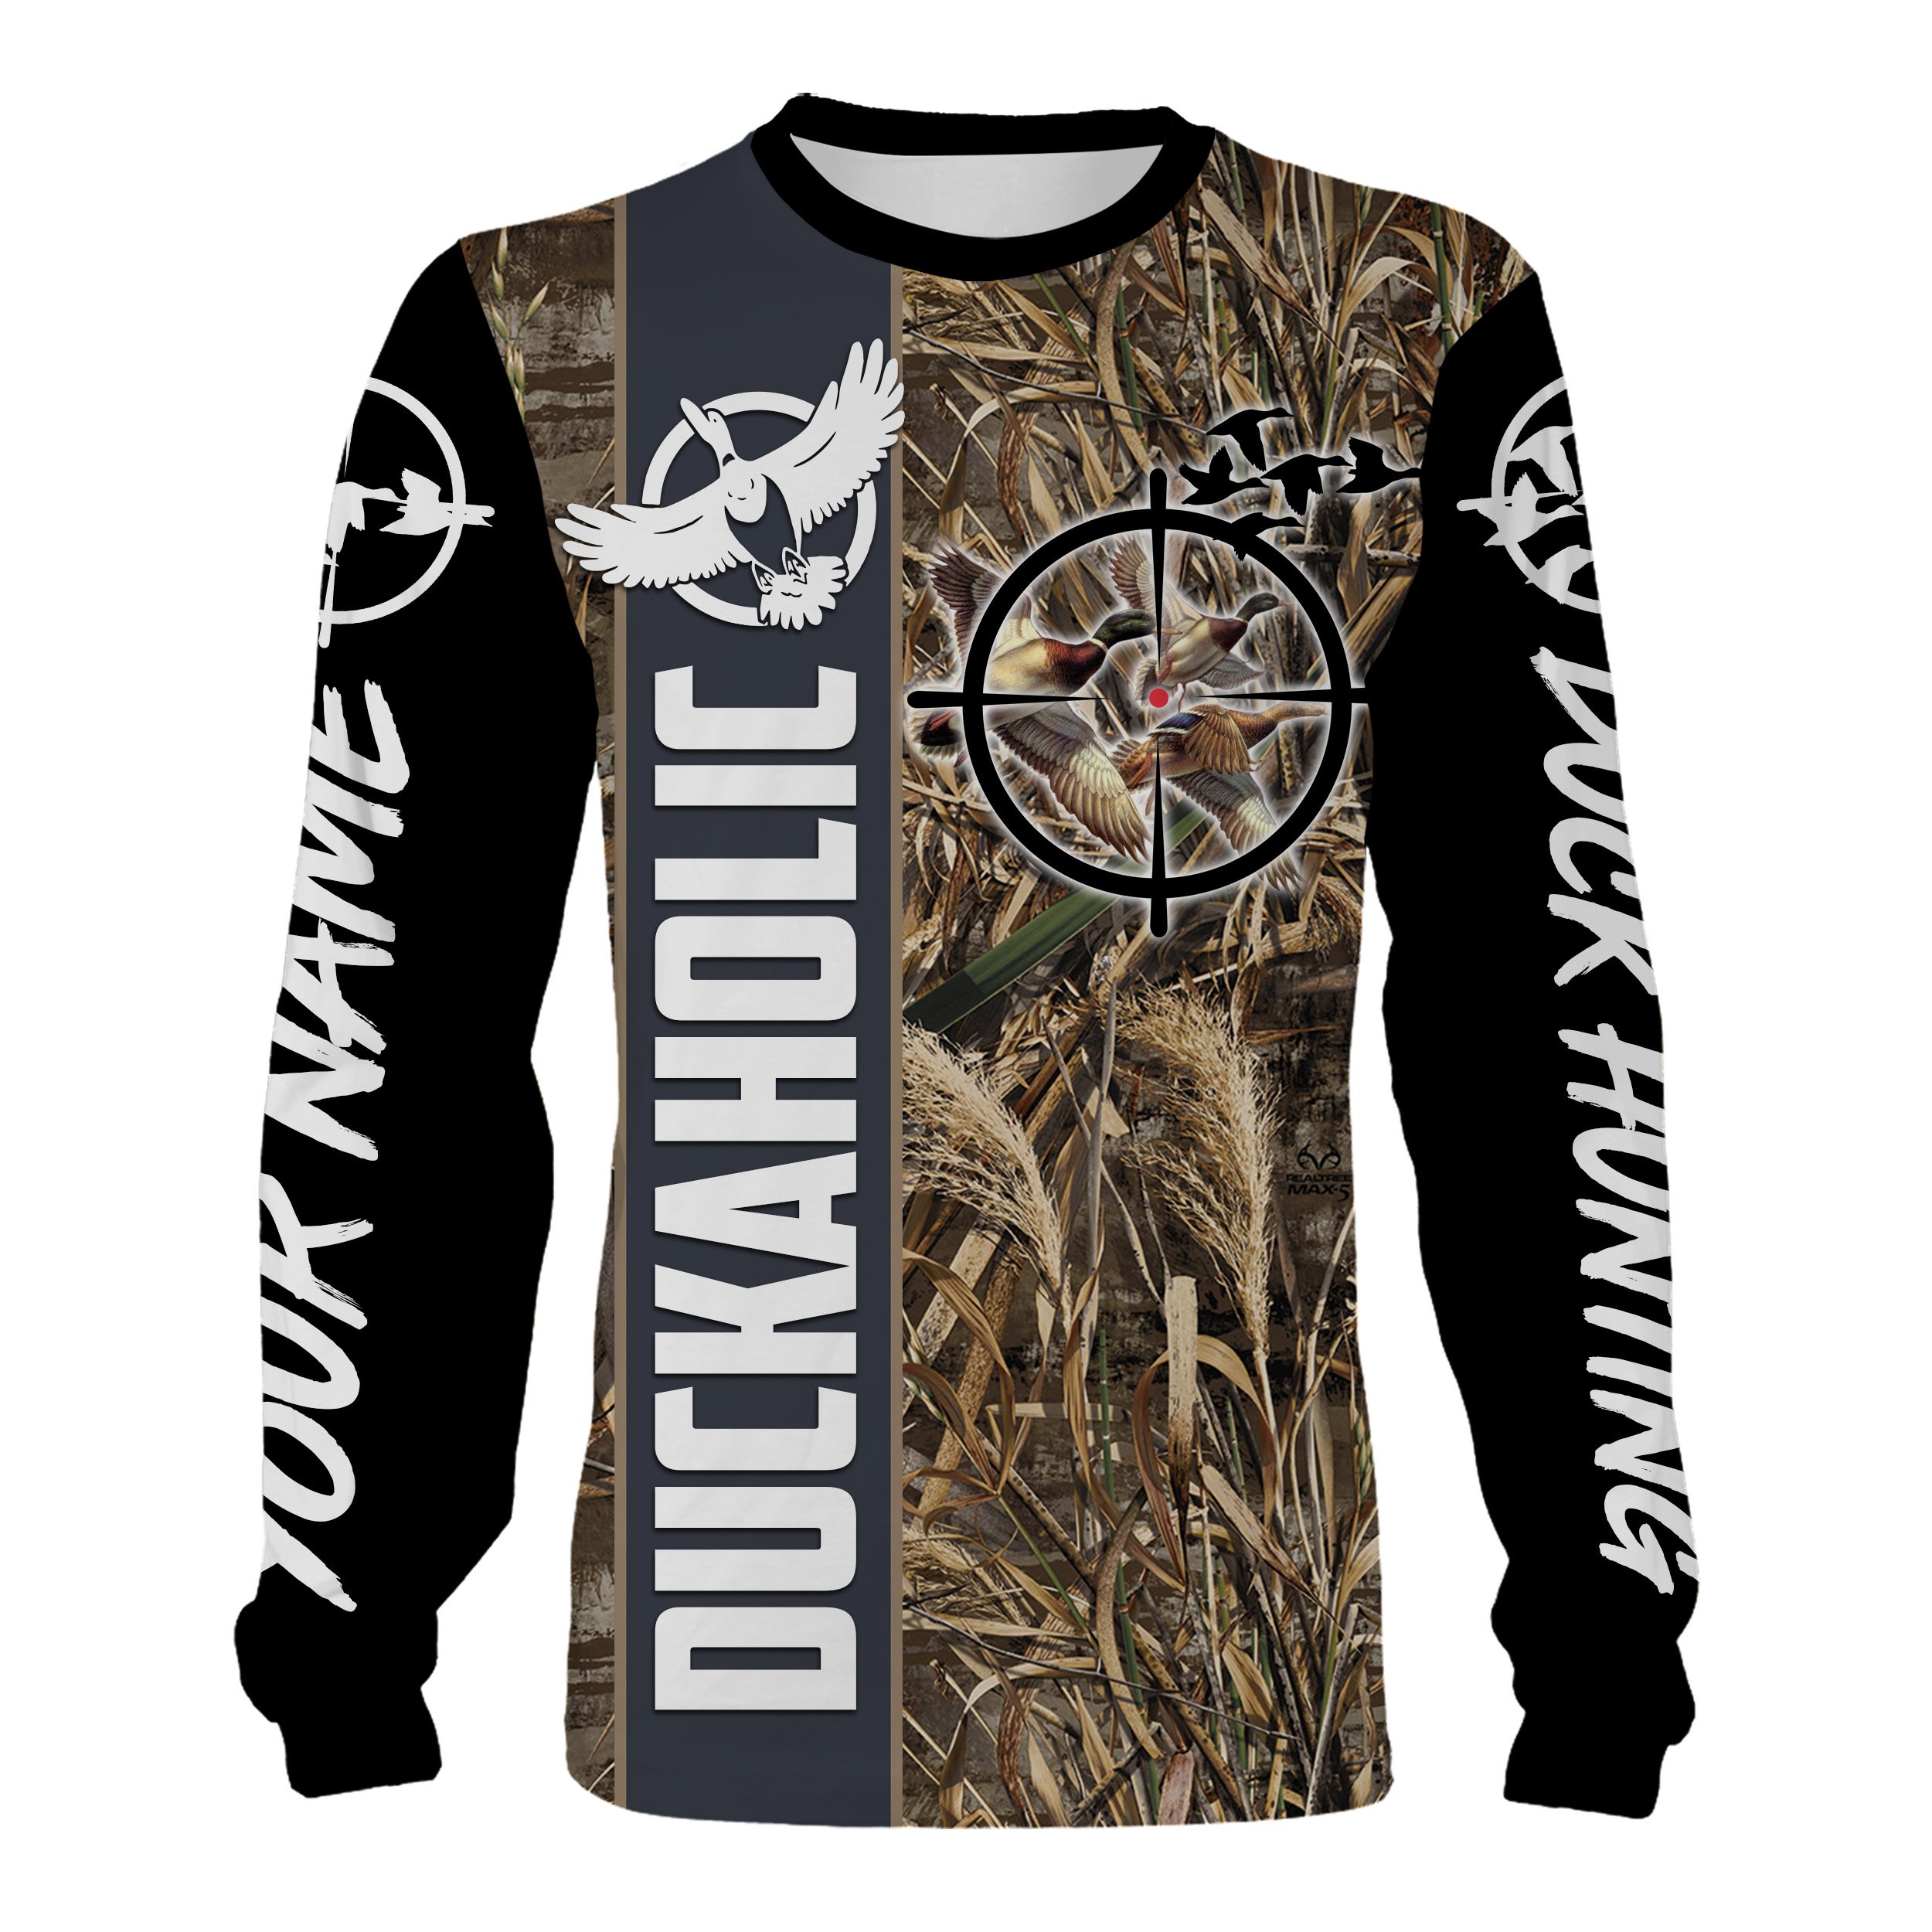 Duckaholic Duck hunting waterfowl camo customize name shirts, Hoodie – Personalized hunting gift for Duck hunter FEB21 FSD1476